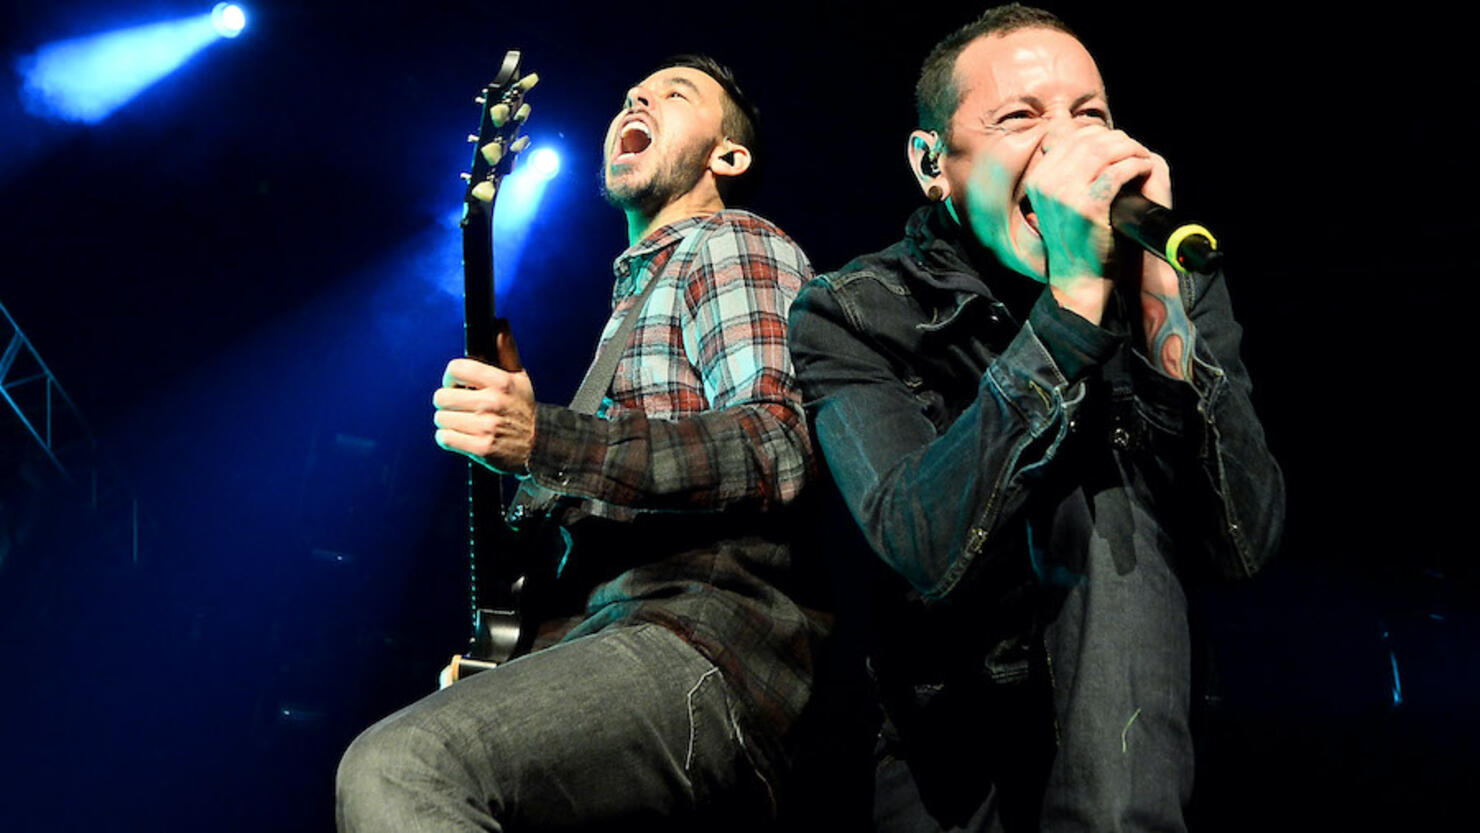 Linkin Park Fans Can Now Turn Their Name Into The Hybrid Theory Logo Iheart